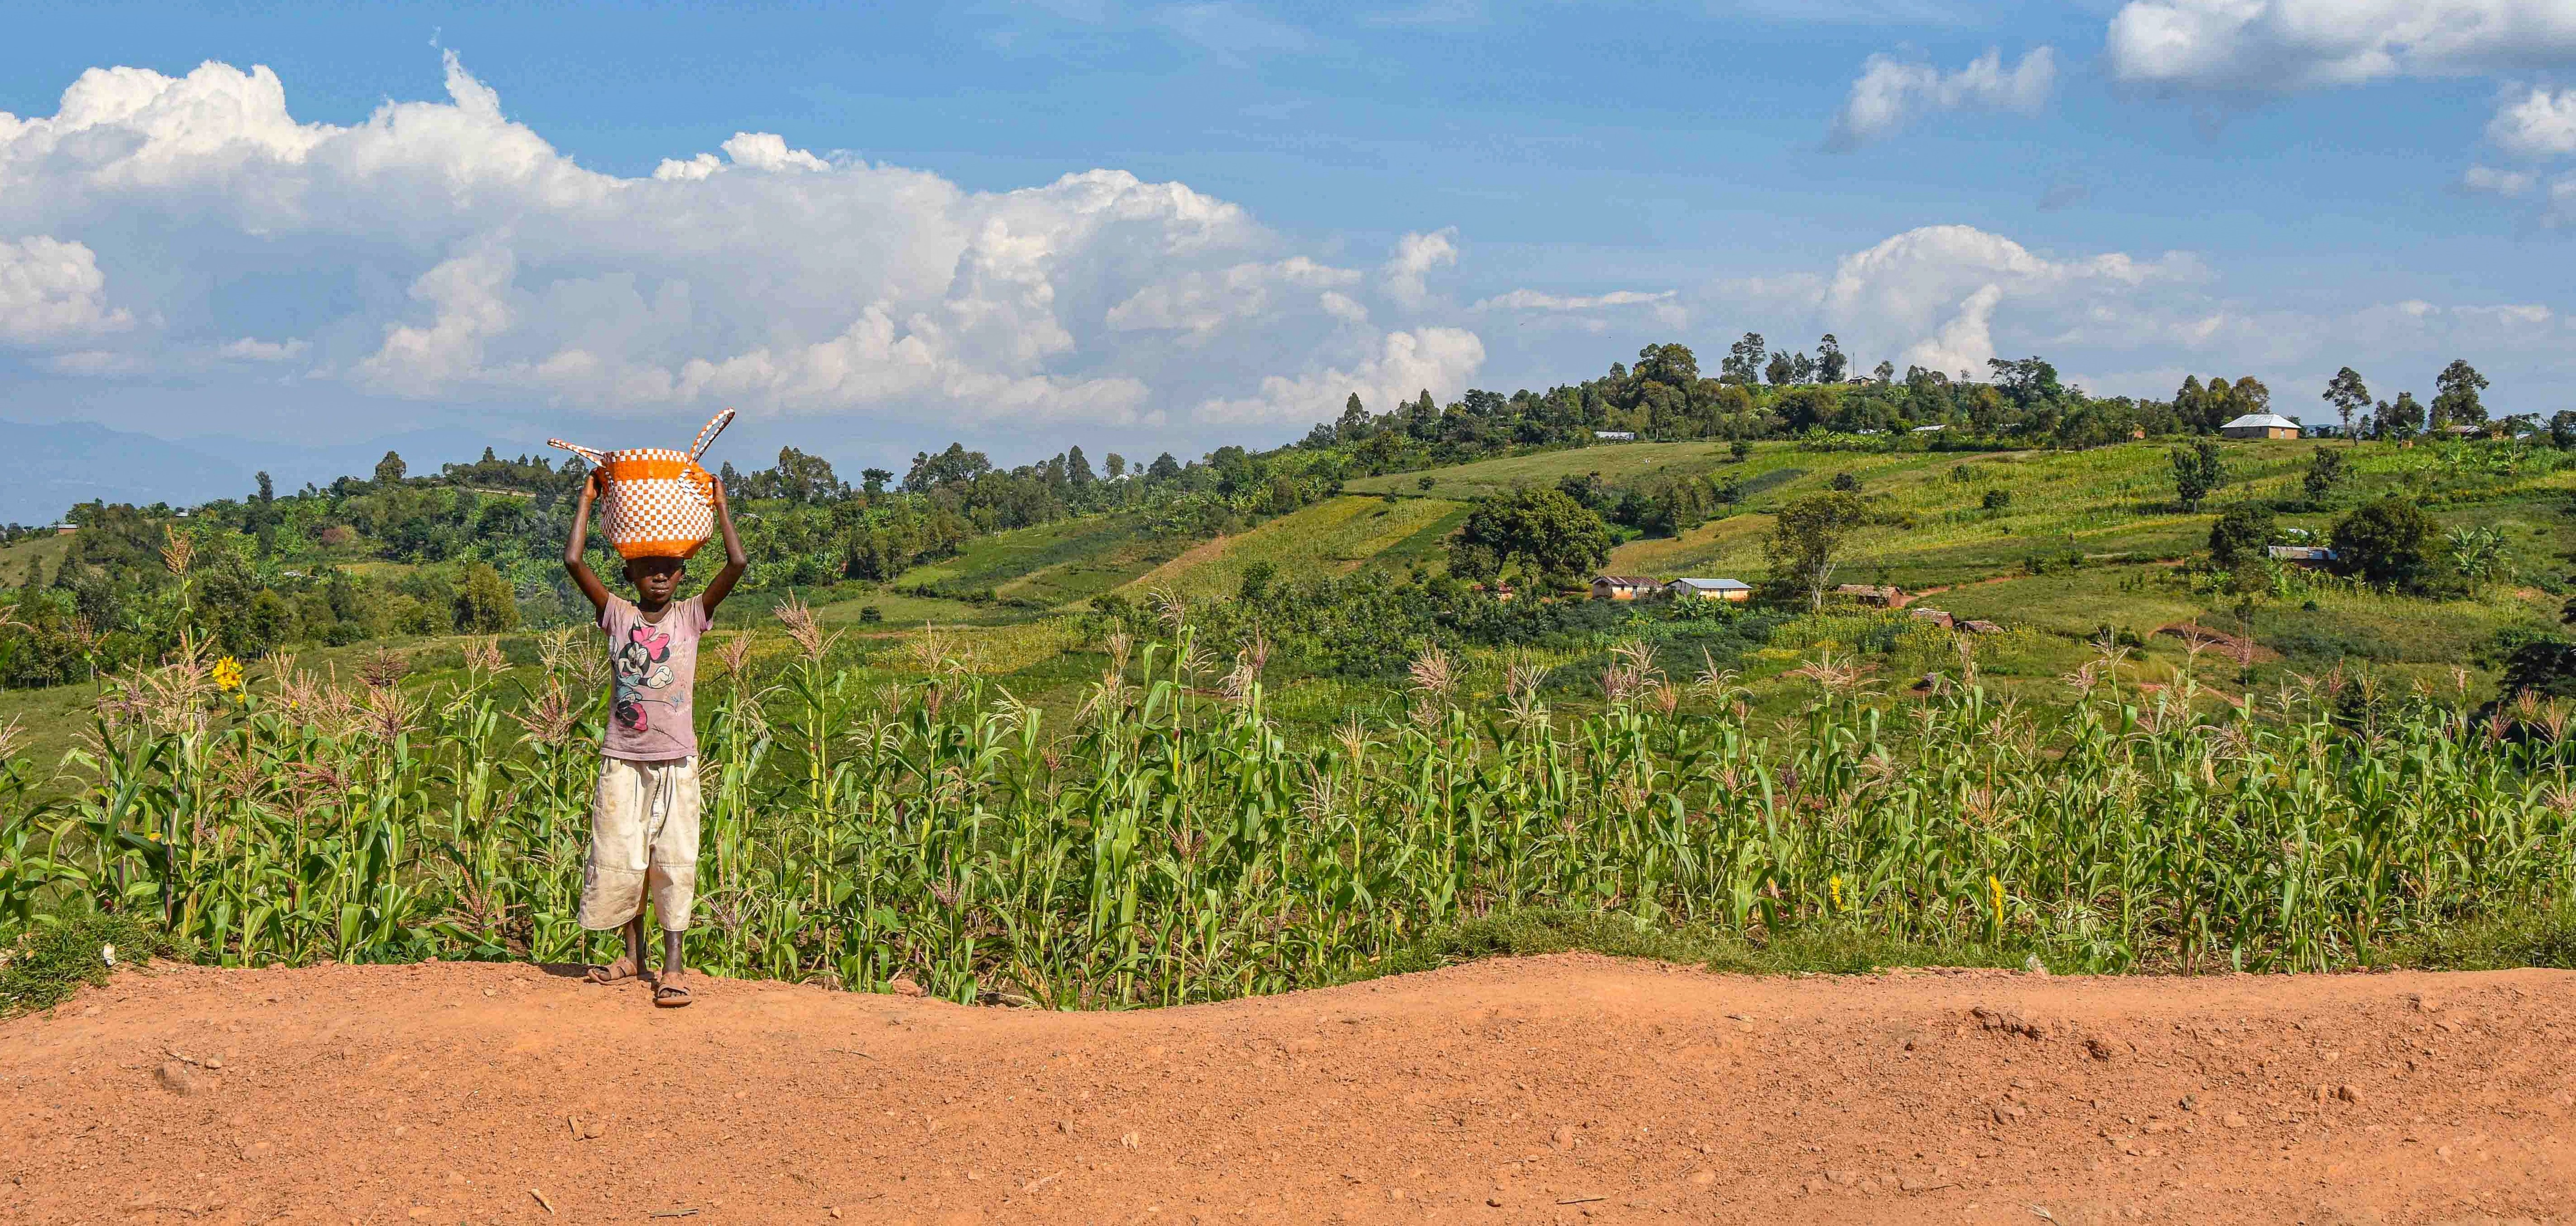 A boy stands on a road in front of a maize field, while behind him a green and hilly landscape stretches out